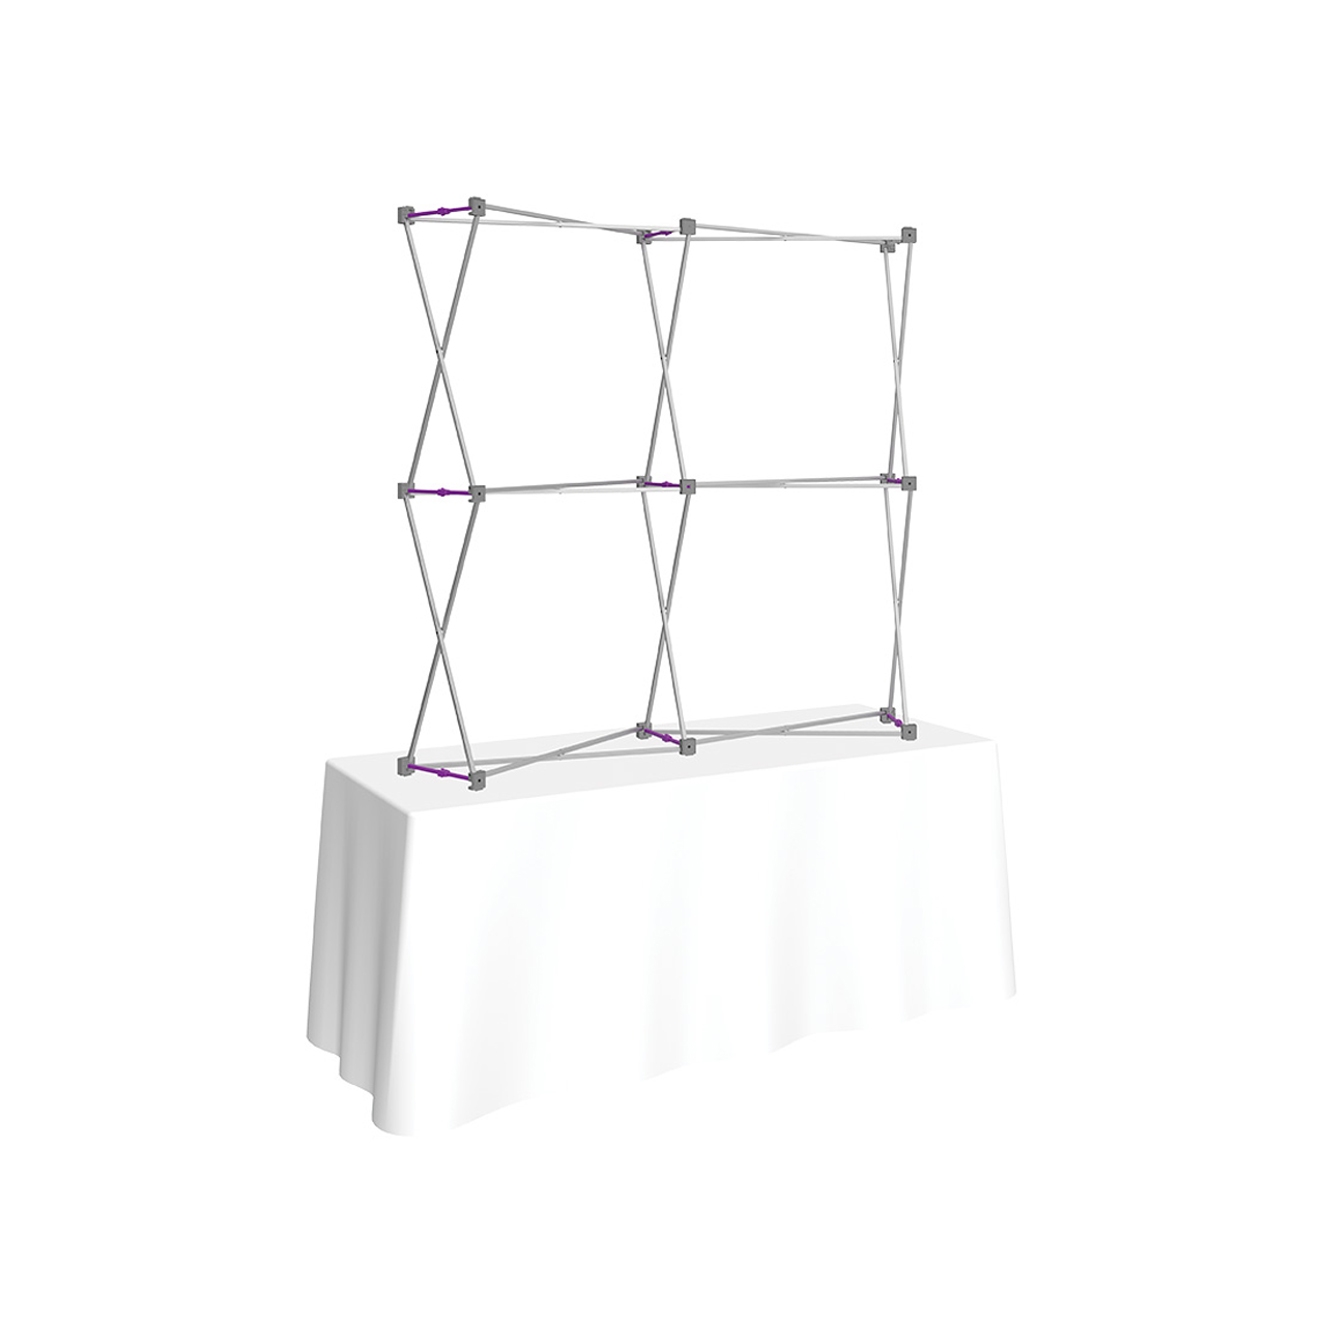 Pop-Fab 2x2 Tabletop Curved Tension Fabric Display